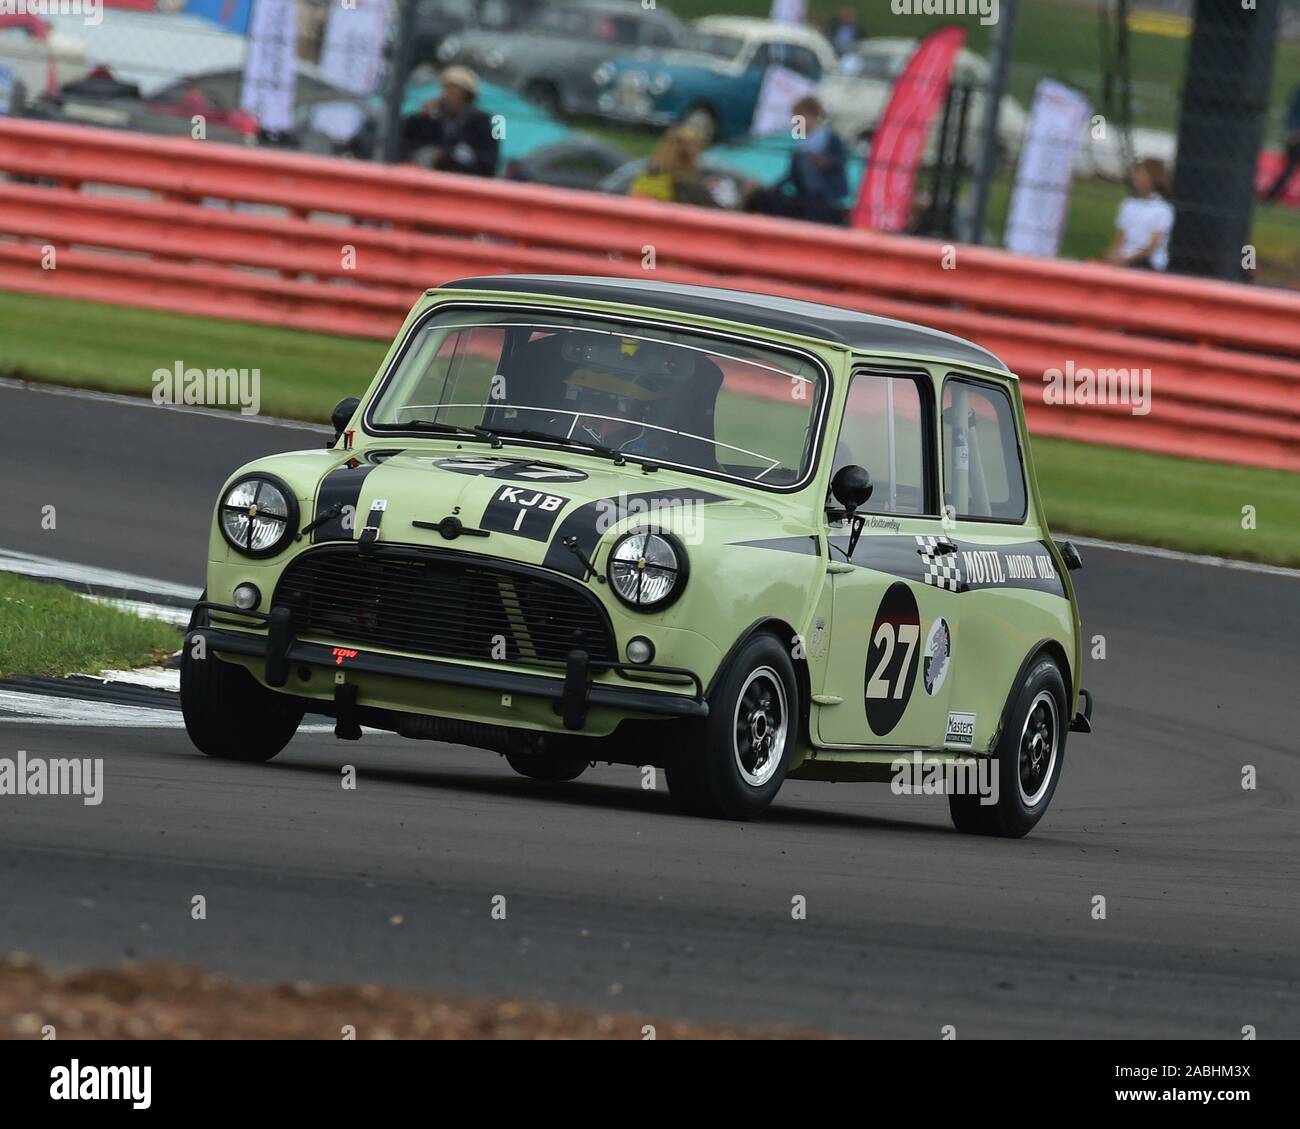 Kevin Bottomley, Jonathan Lewis, Morris Mini Cooper S, Transatlantic Trophy for Pre '66 Touring Cars, Silverstone Classic, July 2019, Silverstone, Nor Stock Photo